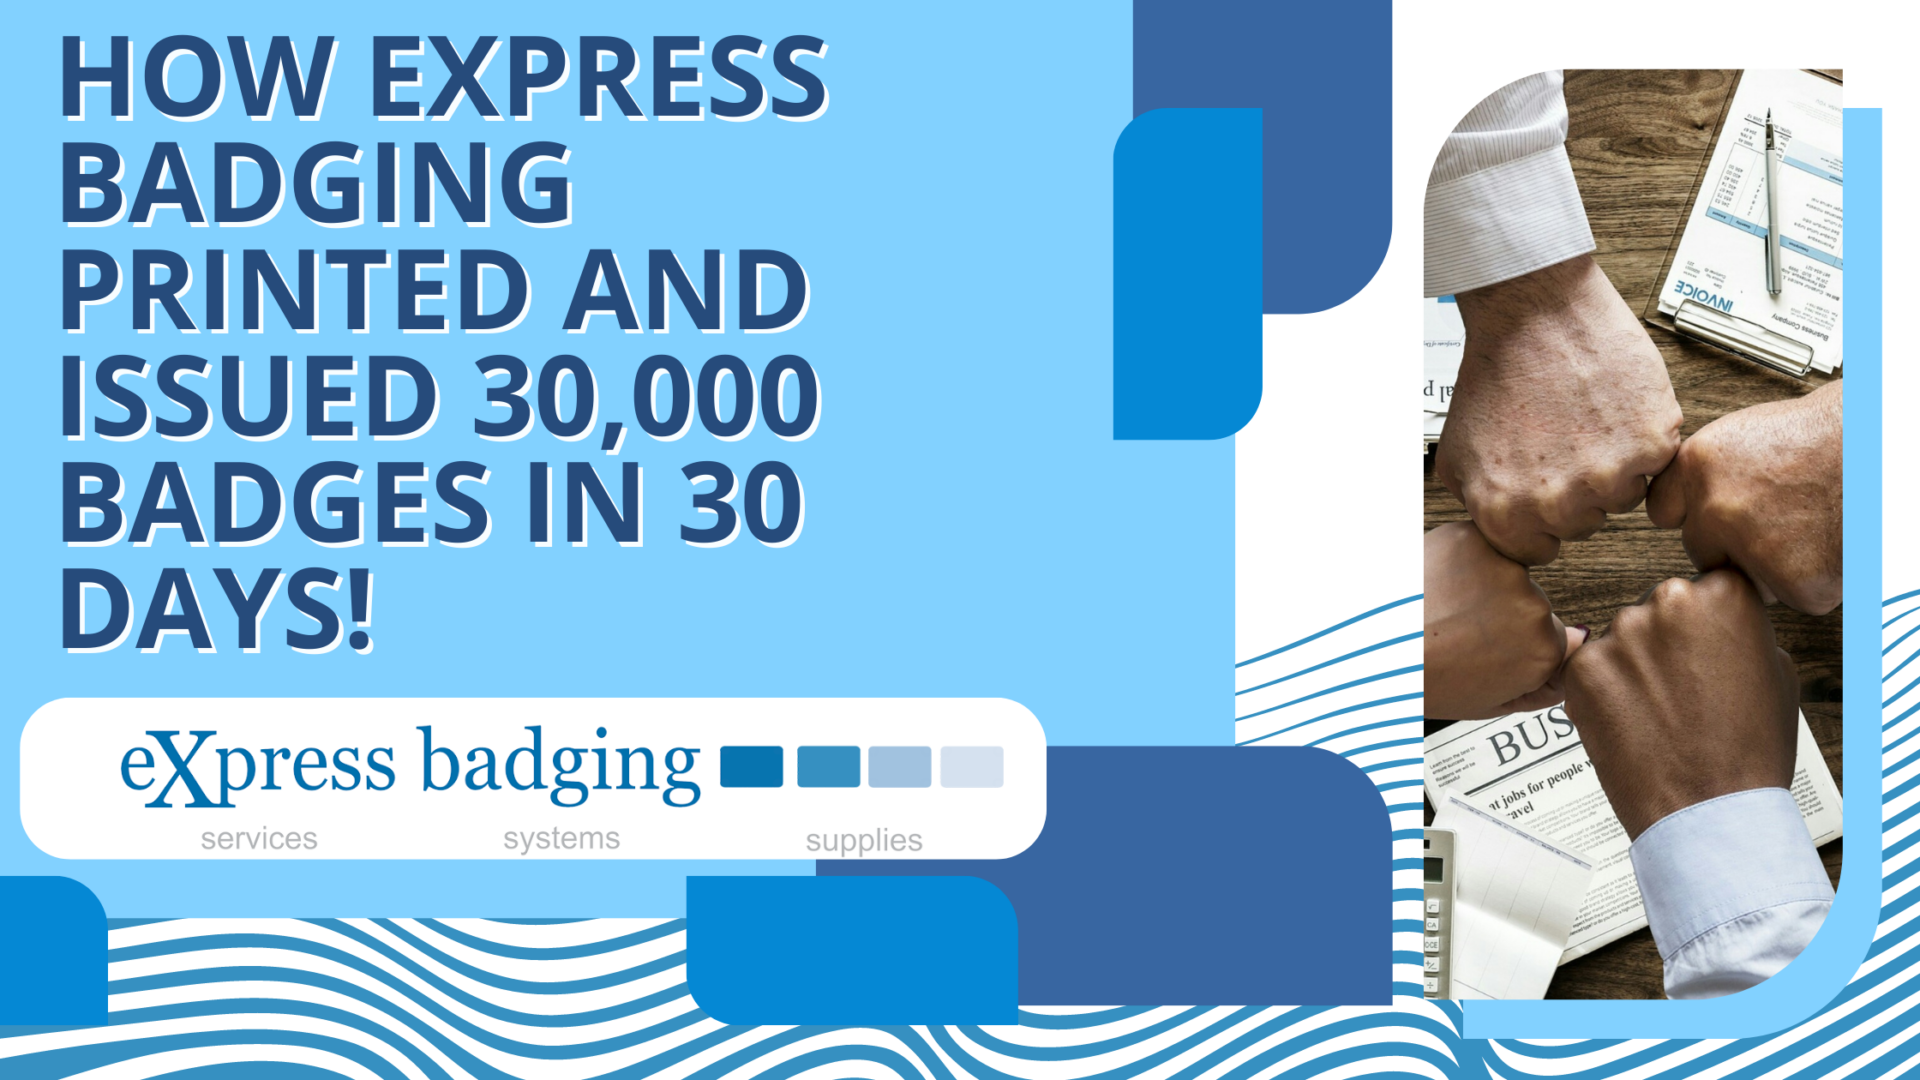 How eXpress badging printed and issued 30,000 badges in 30 days!